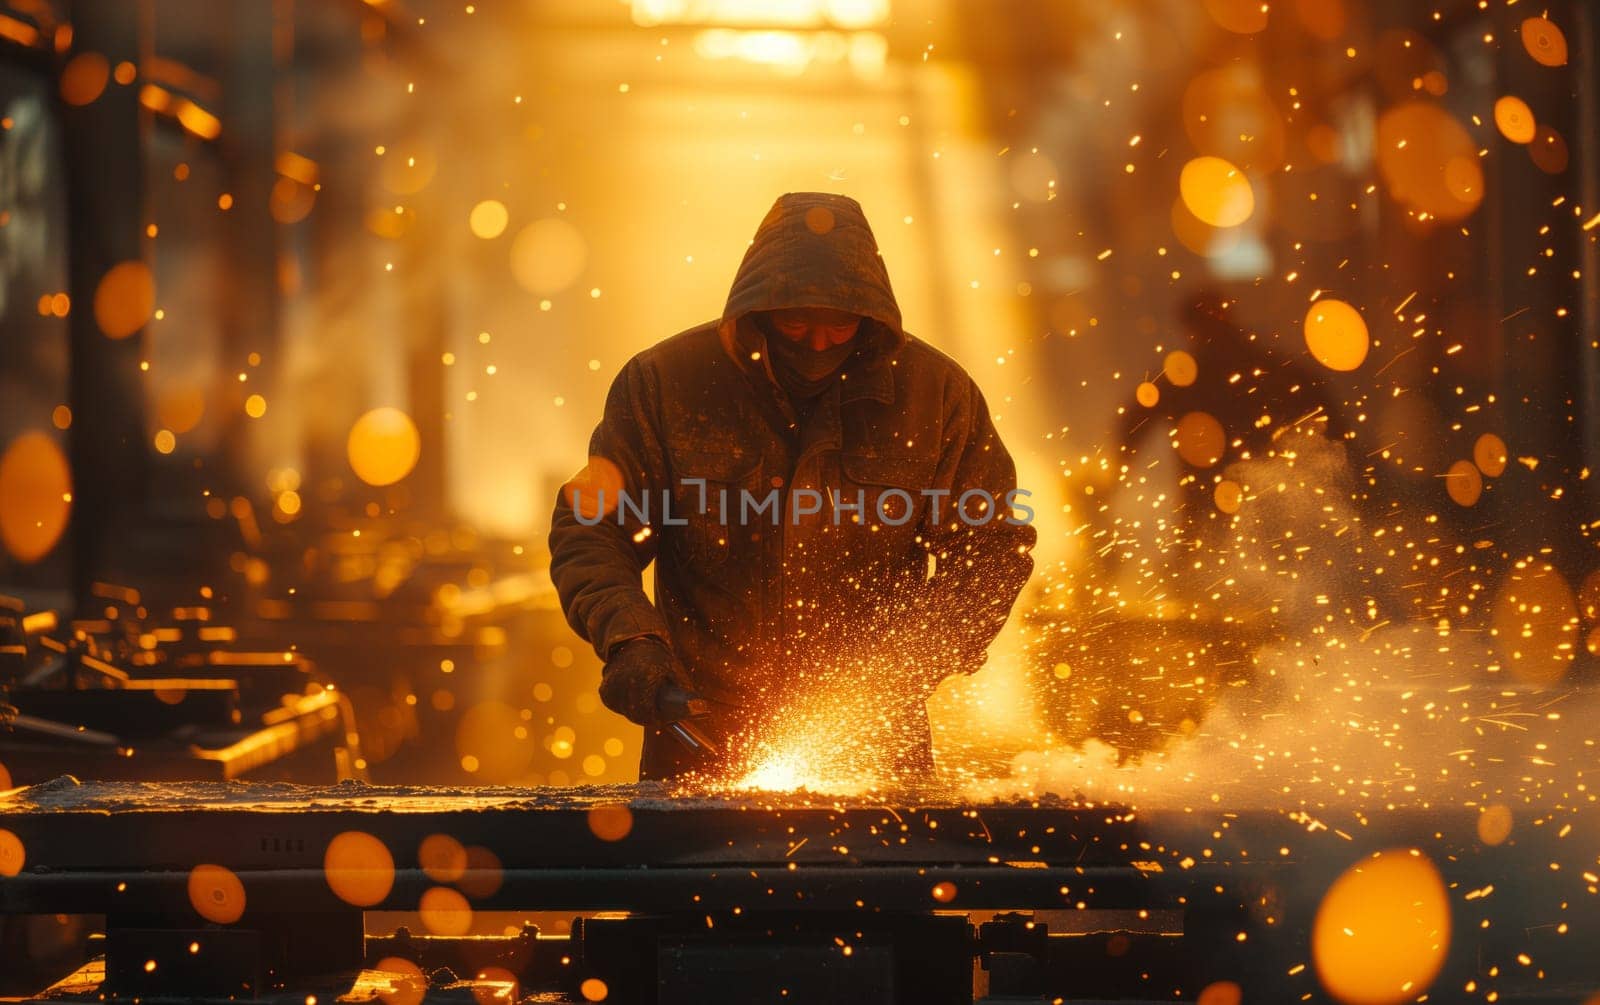 A man welds a piece of metal in a factory, creating sparks and flames by richwolf